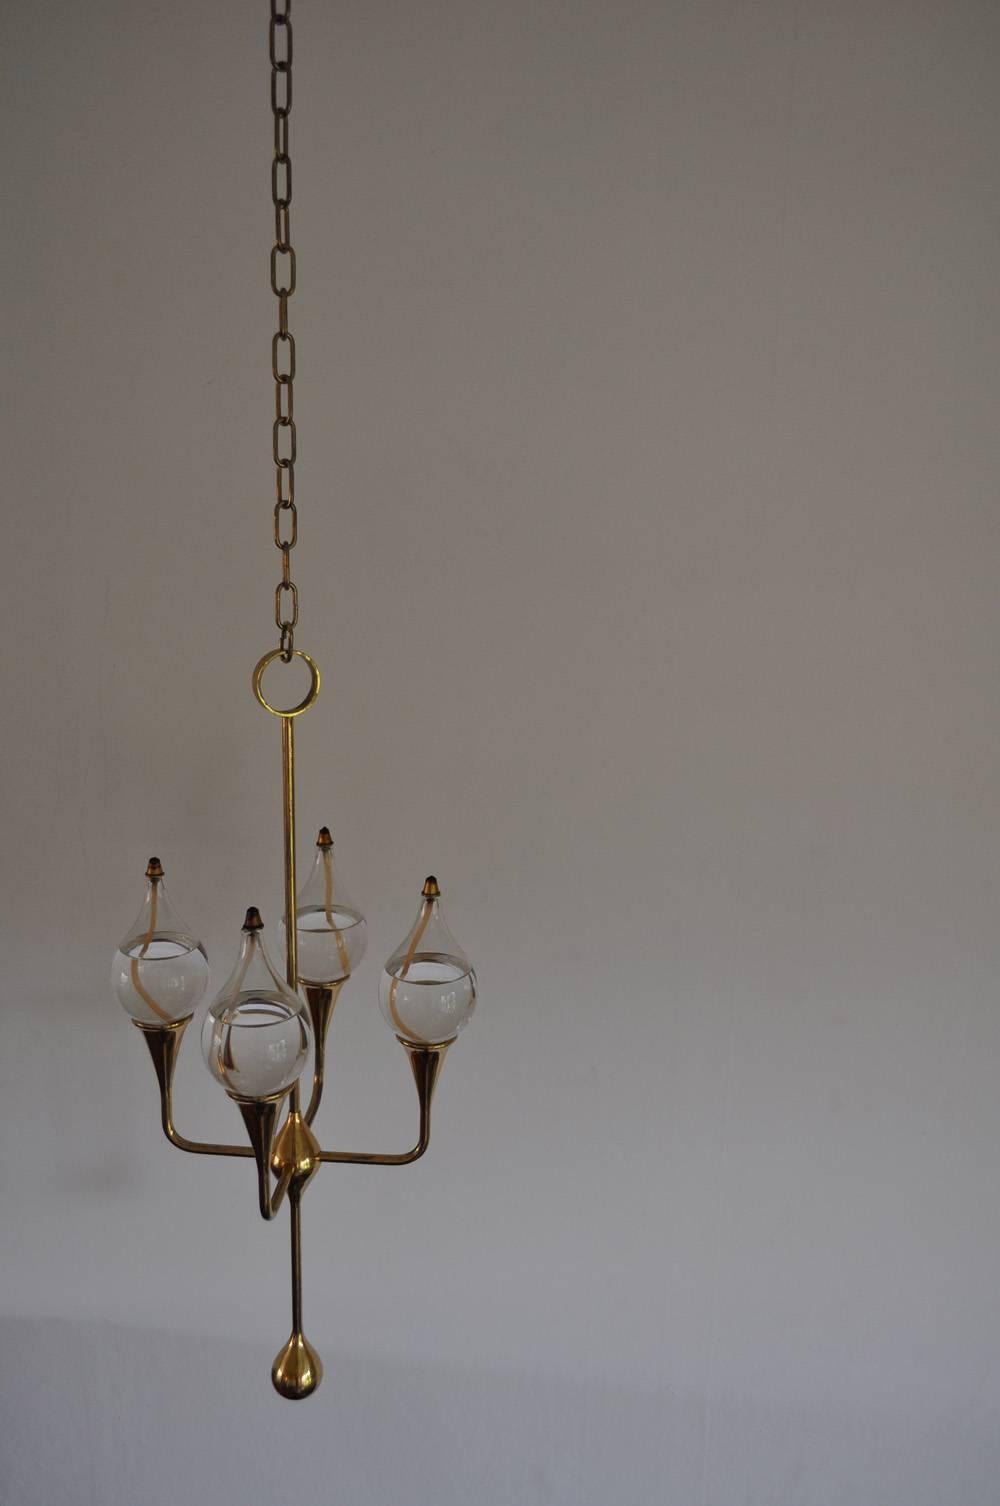 Four armed clear drop oil lamp candelabra by Freddie Andersen, Denmark in the 1970s.

A very decorative hanging oil lamp made of solid brass and glass.
Also a set of two clear drop wall lamps available.

Dimensions: 
Height with chain: 95